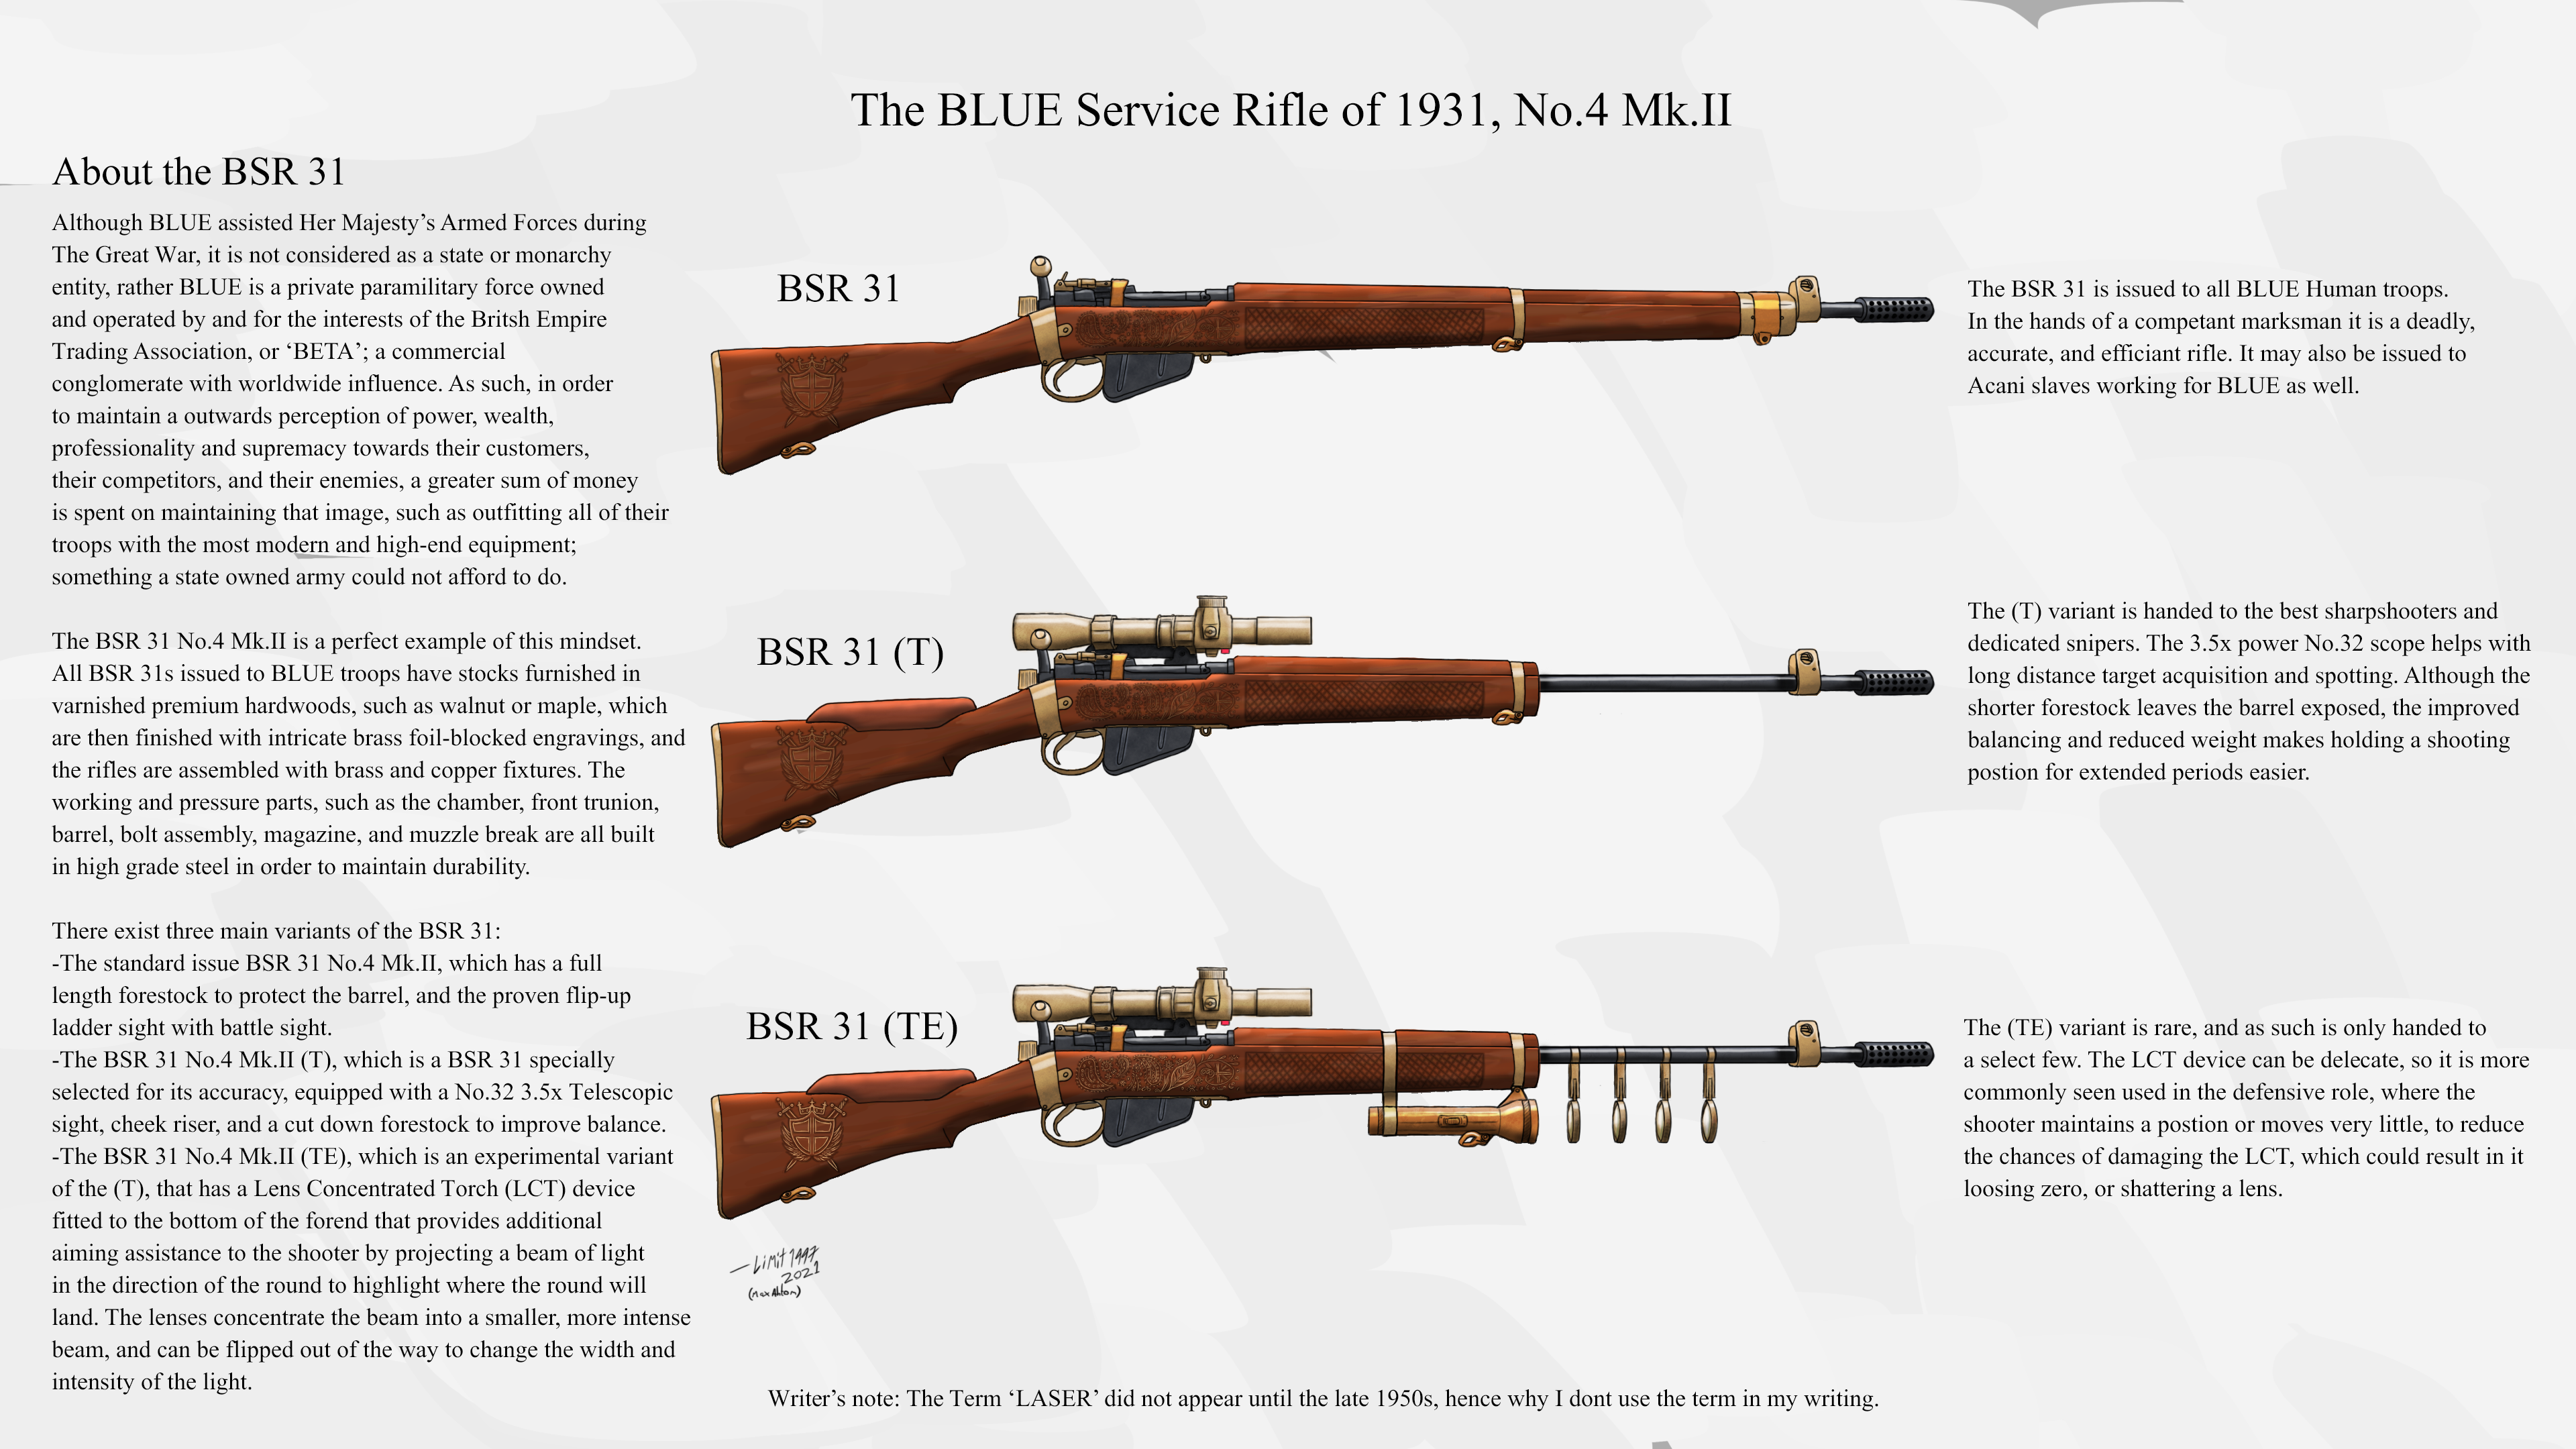 The BLUE Service Rifle of 1931, No4 Mk.II by Limit1997 on DeviantArt